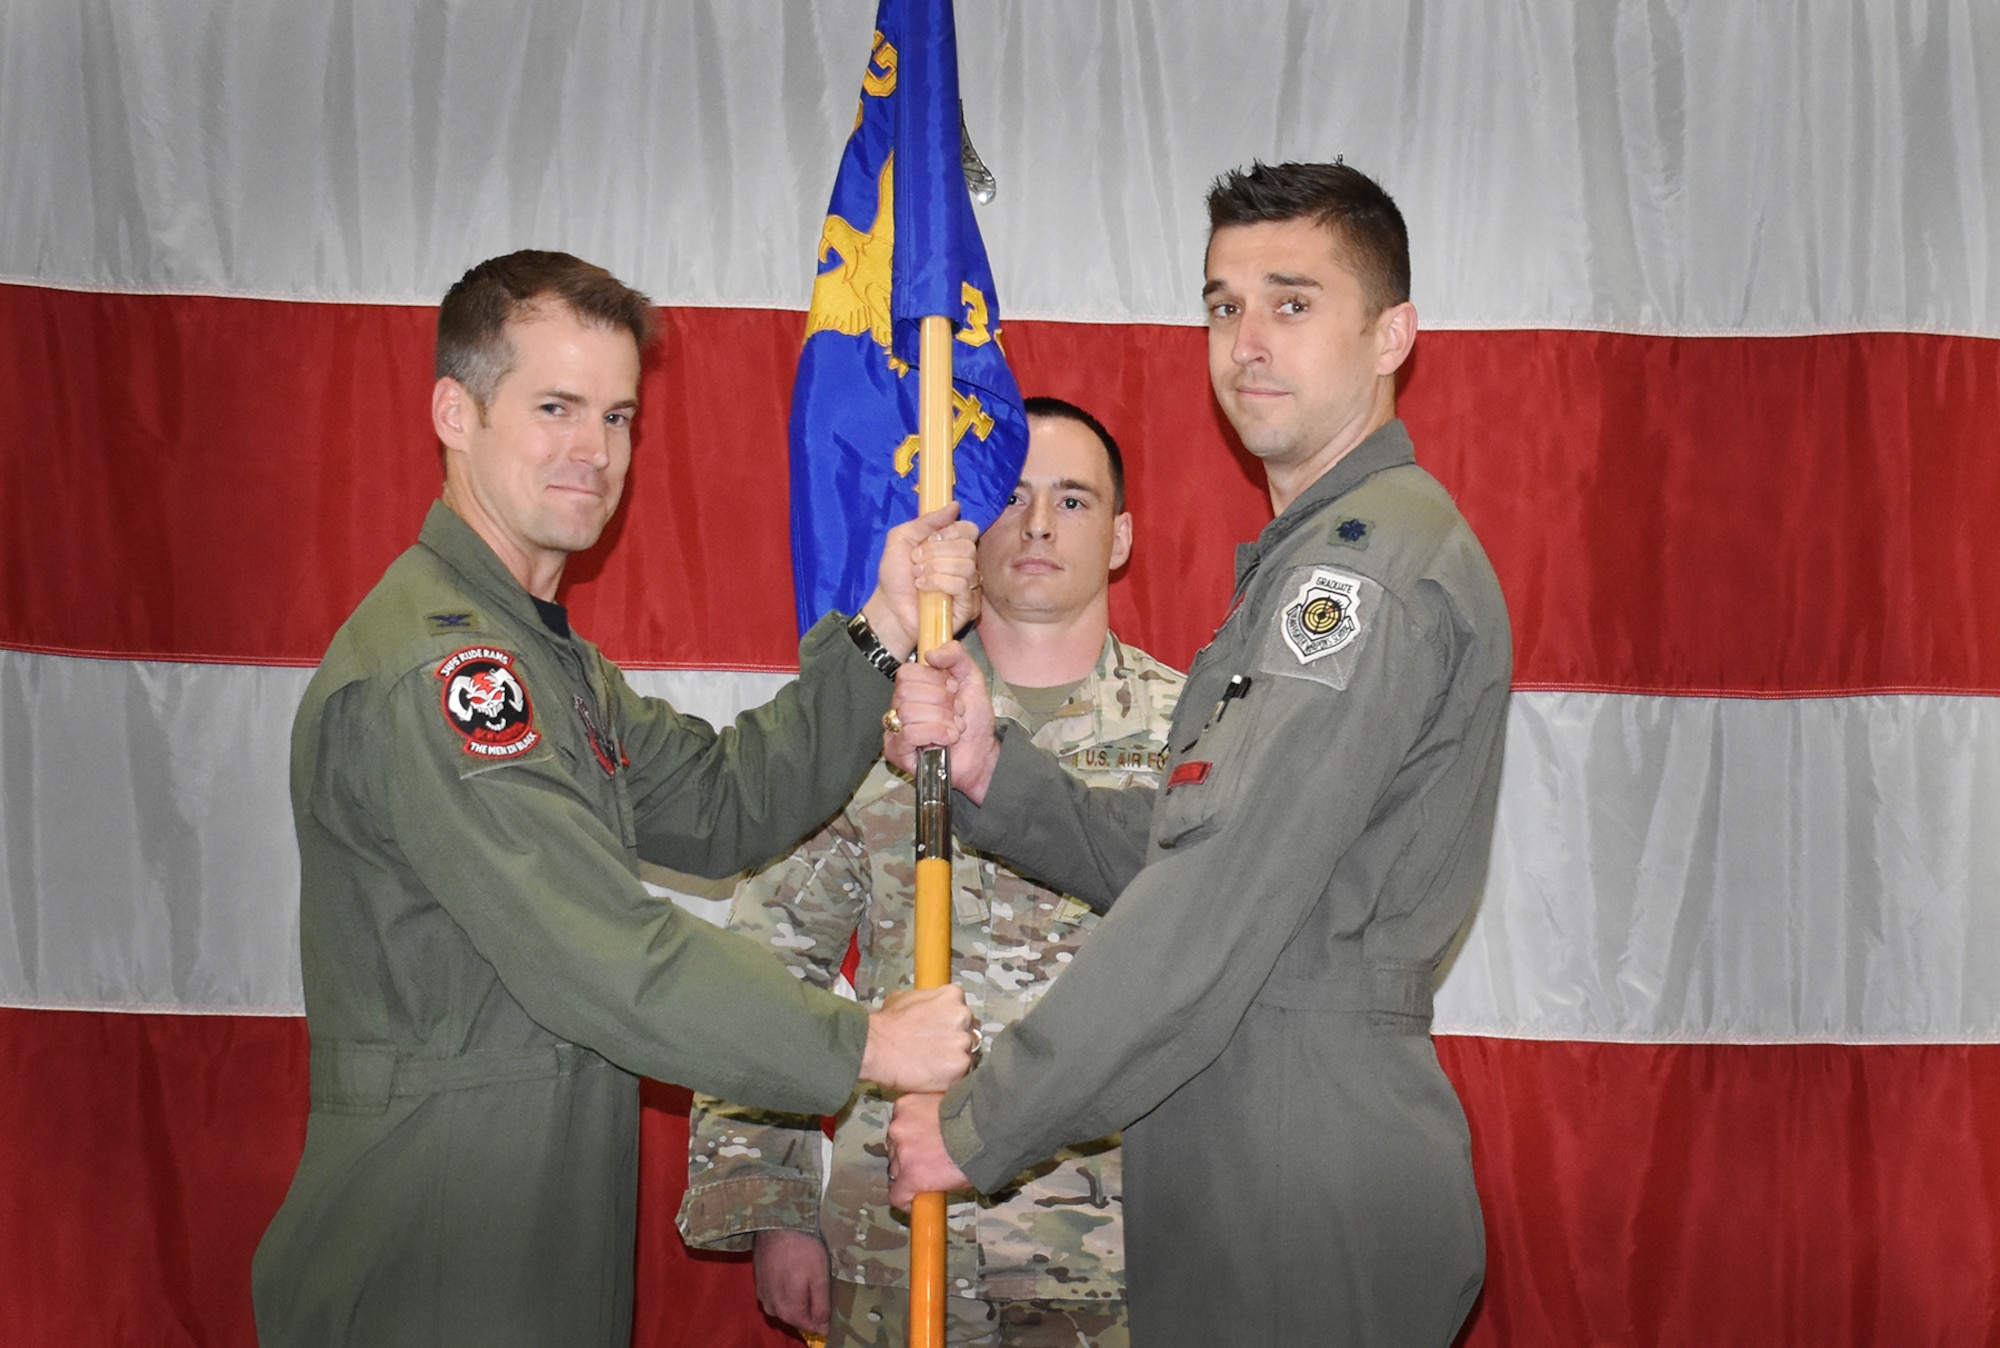 Col. Joshua Wood, 388th Fighter Wing Operations Group commander, left, passes the guidon of the 34th Fighter Squadron to Lt. Col. Aaron Cavasos, as he takes command of the “Rude Rams” May 17, 2019. Cavasos previously served as the director of operations for the squadron. The 34th Fighter Squadron was the first of the 388th FW units to stand up as an operational F-35A Lightning II Squadron in 2015. Cavasos is the 3rd commander since then. Lt. Col. Matthew Johnston relinquished command and is headed to another assignment in Washington, D.C.